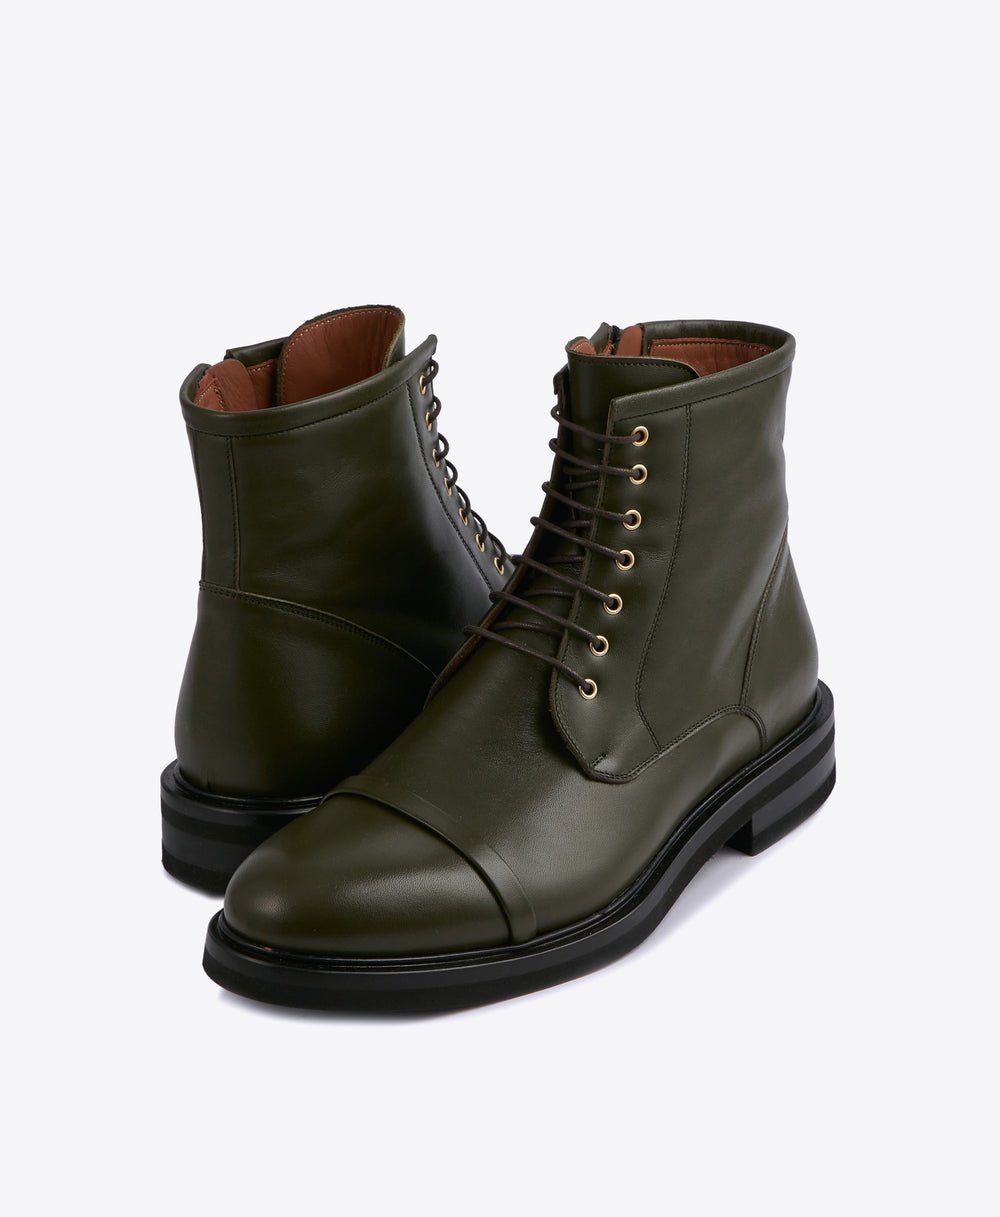 Men's Green Leather Combat Boots With Laces Malone Souliers